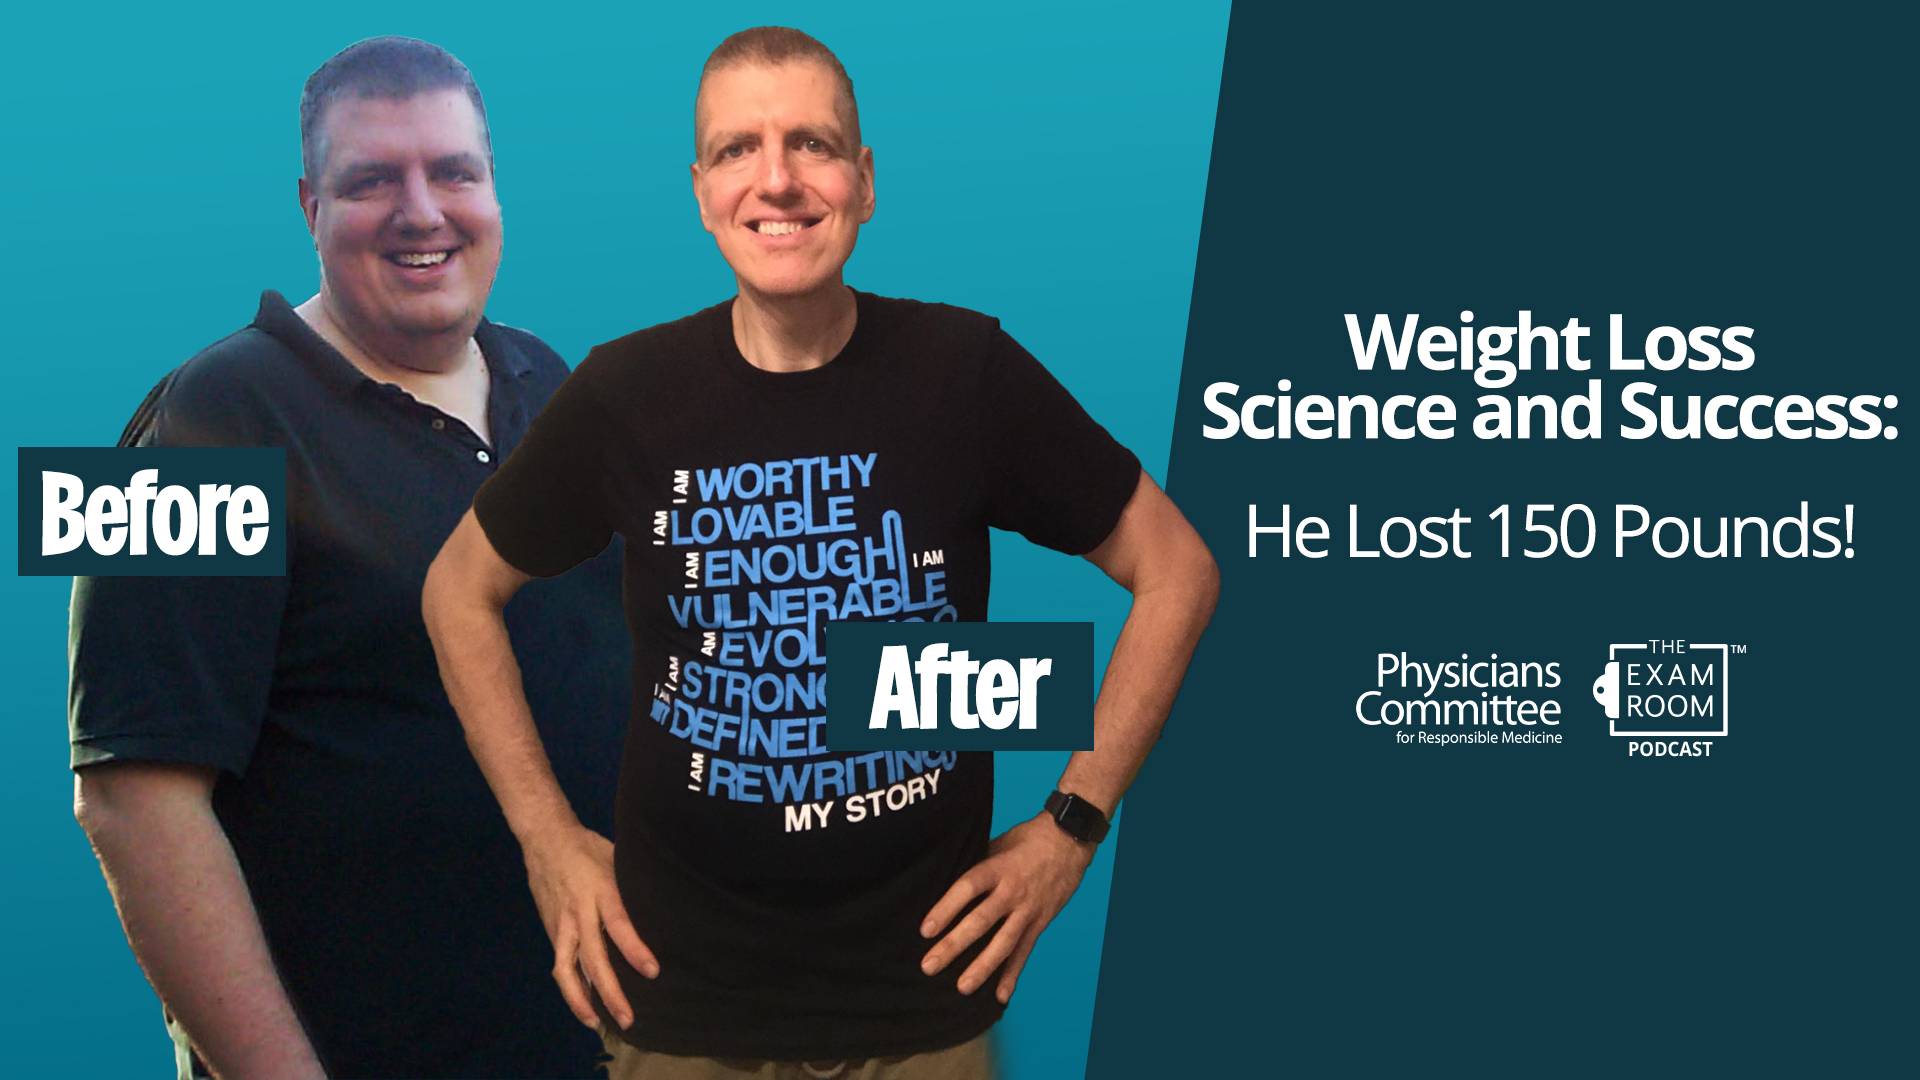 Weight Loss Science and Success: He Lost 150 Pounds!